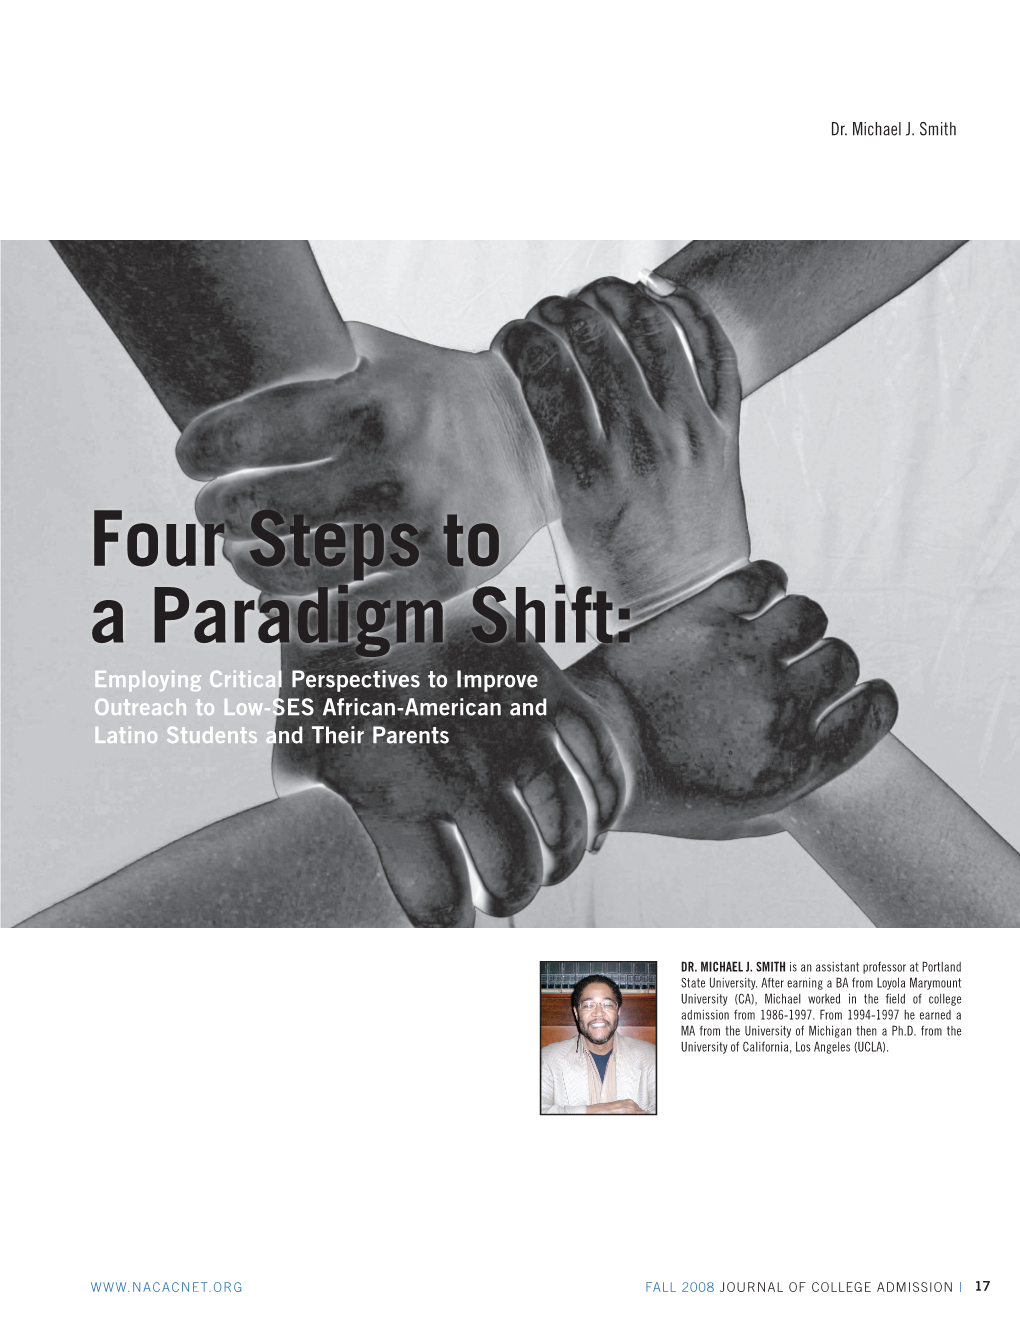 Four Steps to a Paradigm Shift: Employing Critical Perspectives to Improve Outreach to Low-SES African-American and Latino Students and Their Parents